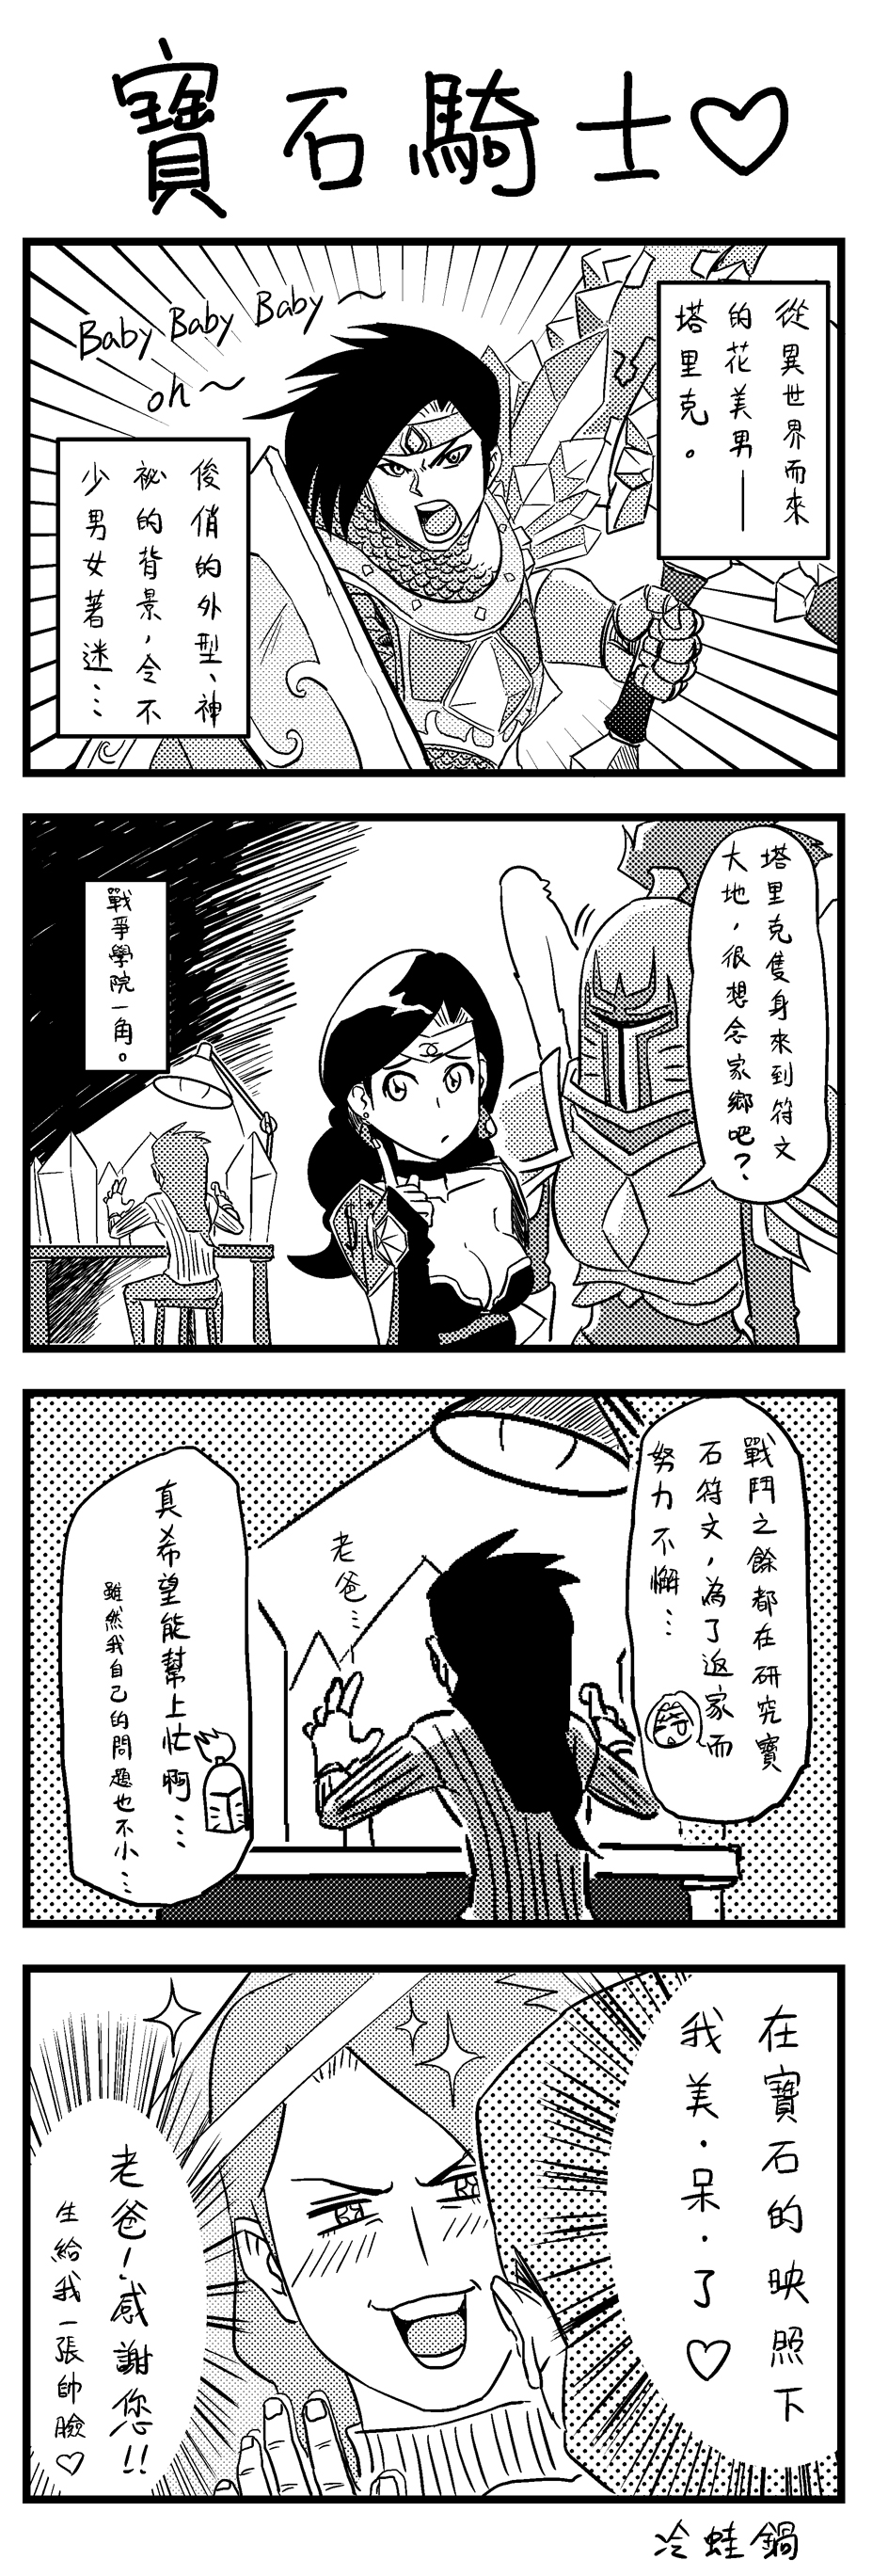 2girls absurdres armor breasts cleavage comic forehead_protector helmet highres kayle league_of_legends leng_wa_guo long_hair monochrome multiple_girls sivir taric translation_request weapon wings